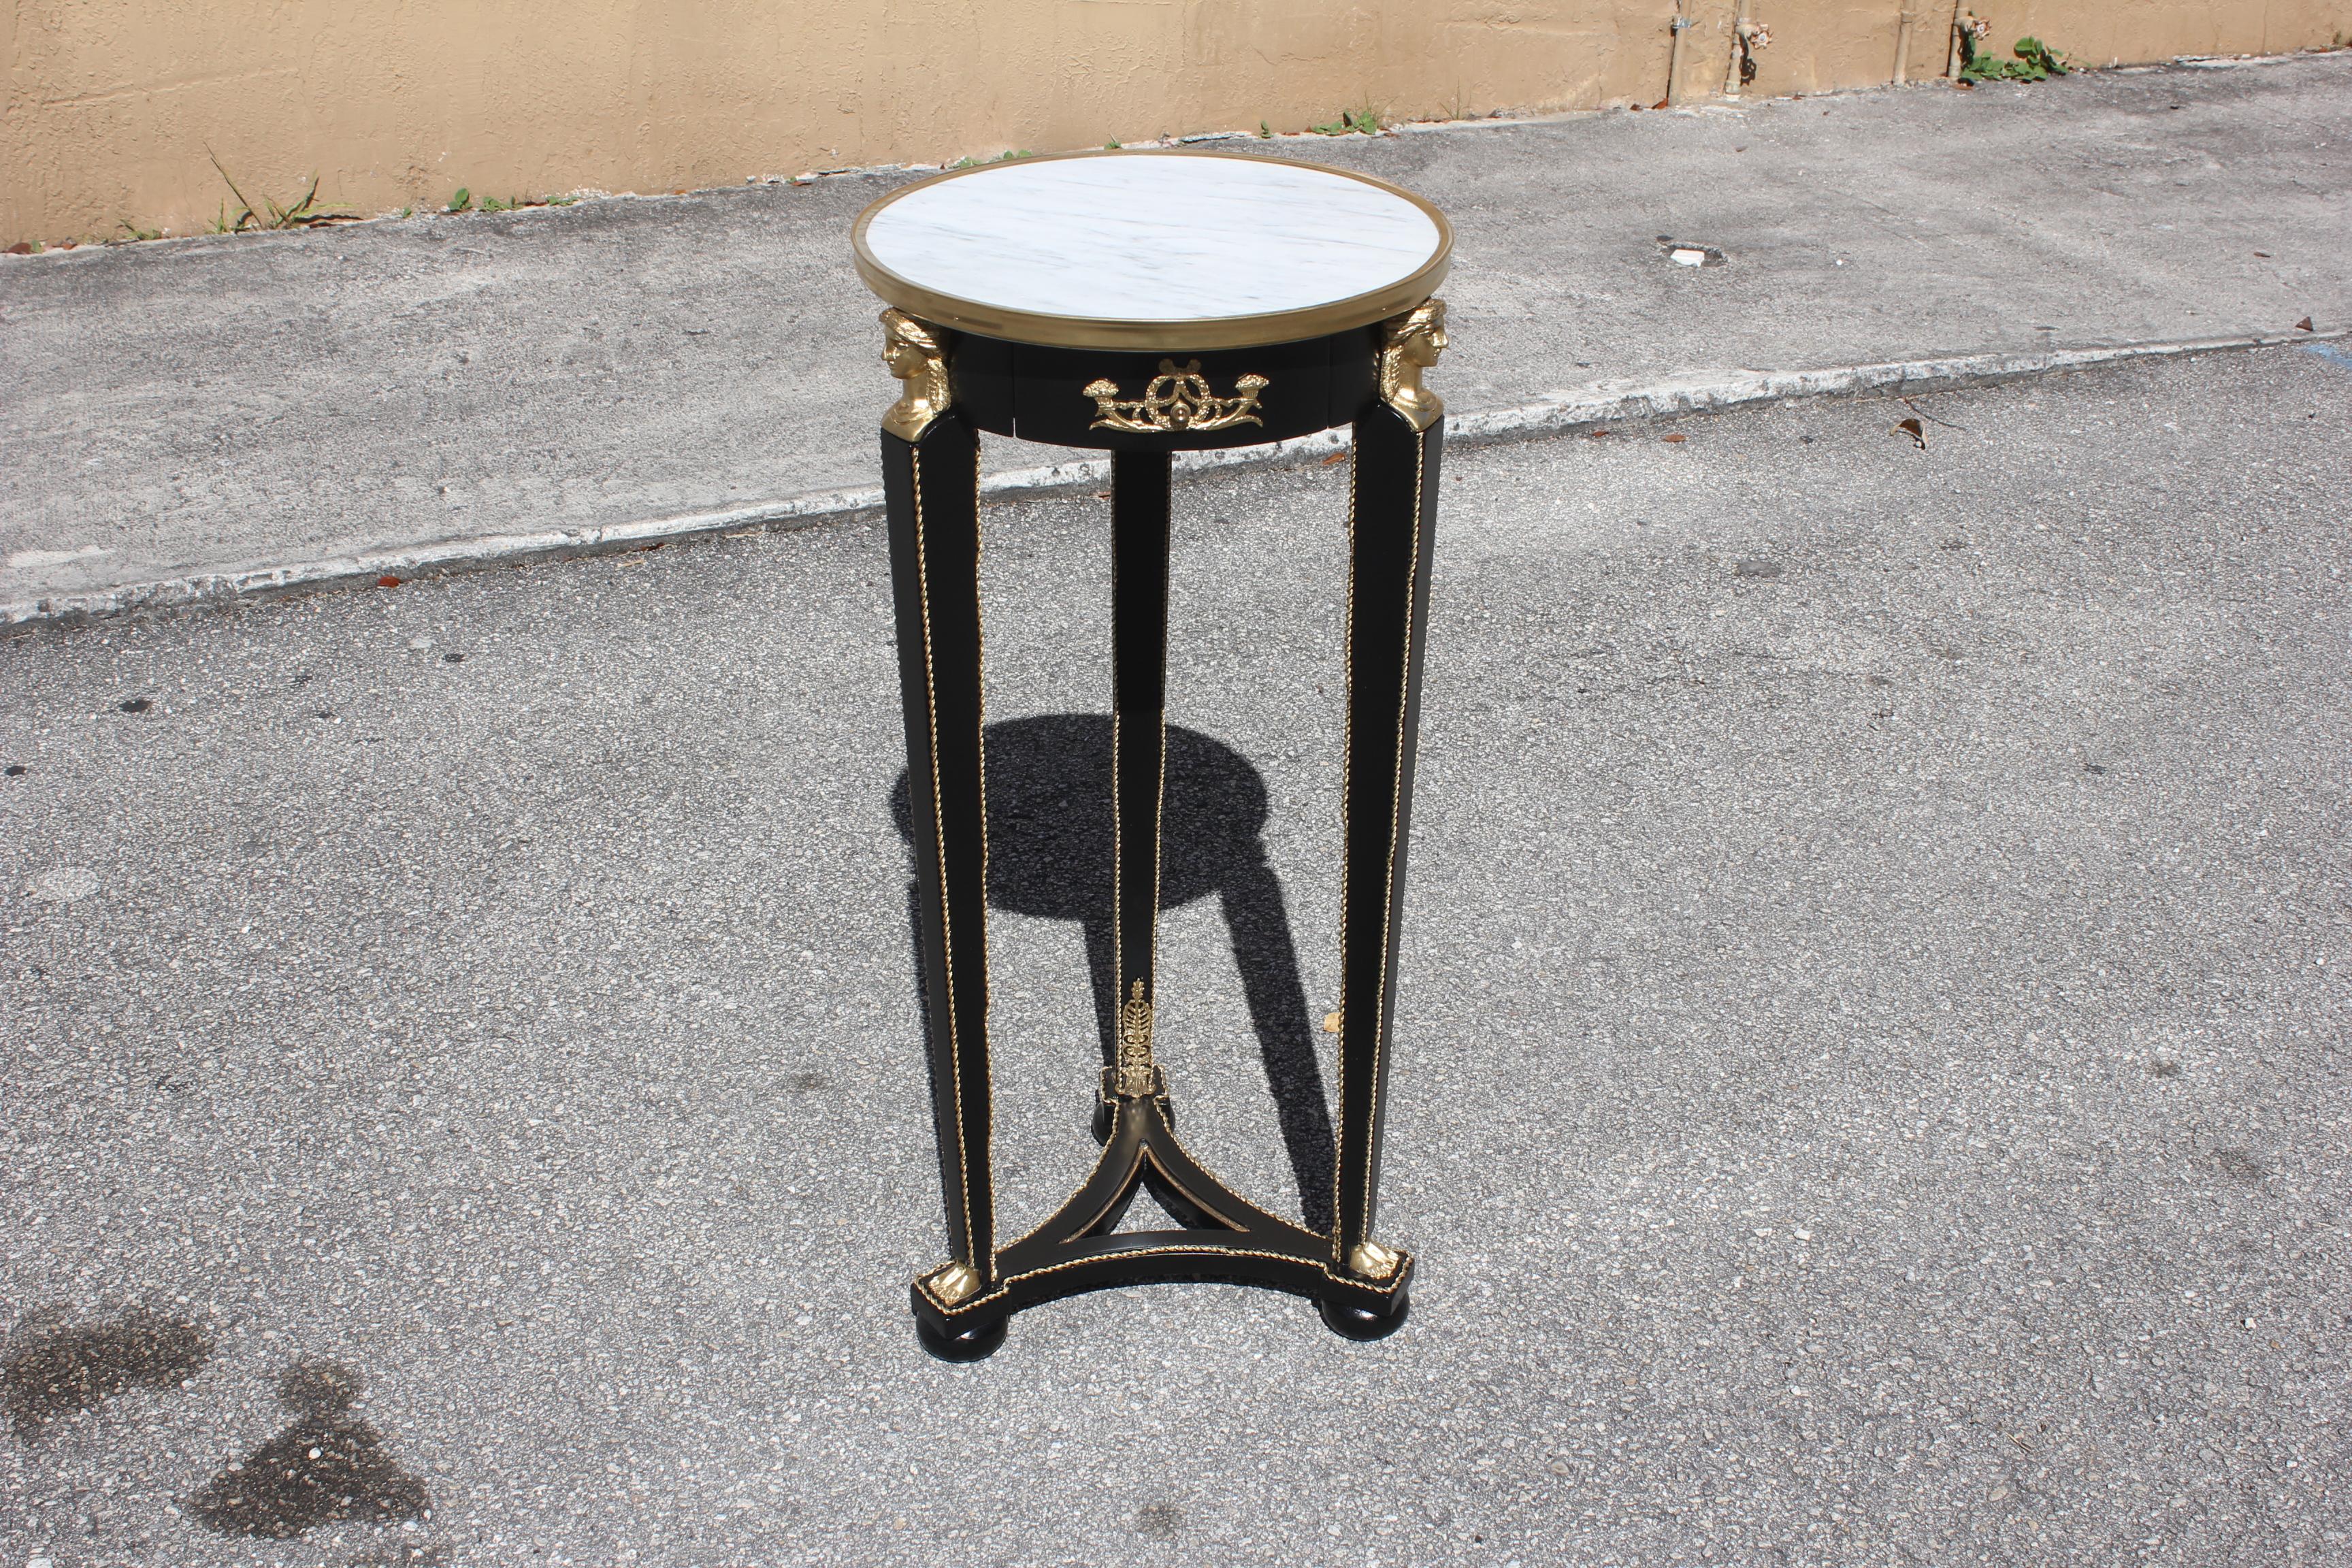 Beautiful French Empire Style Tall Side Table or Pedestal Table Marble Table 1